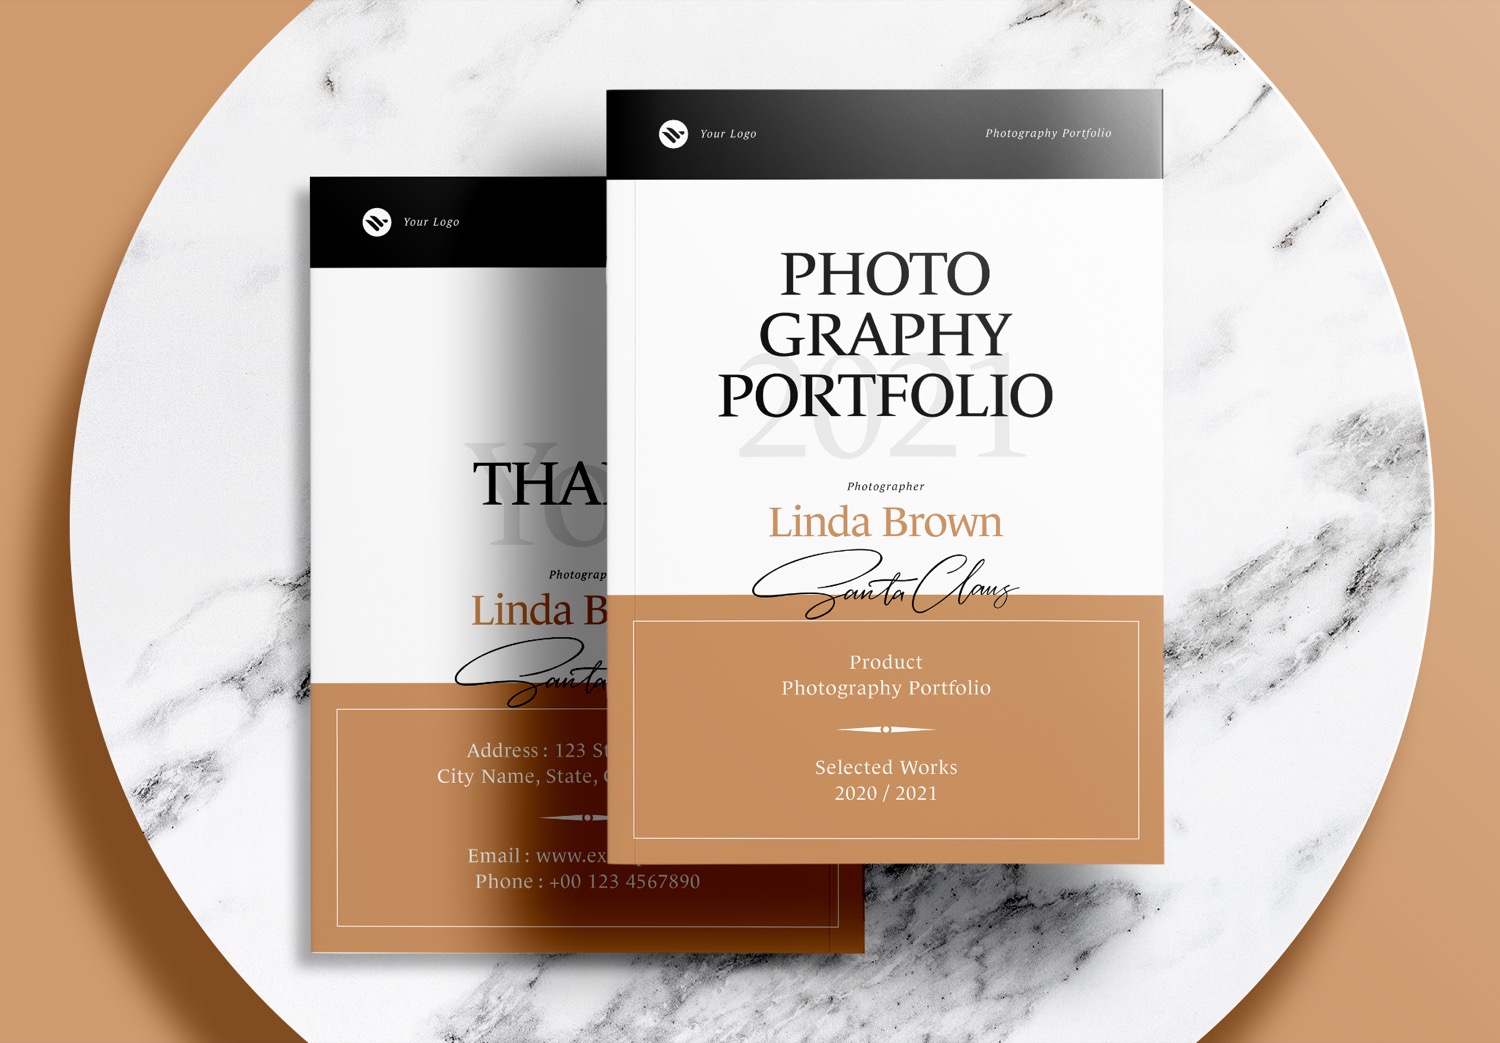 Free-InDesign-Modern-Photography-Portfolio-Layout-Templates-with-Brown-Accents